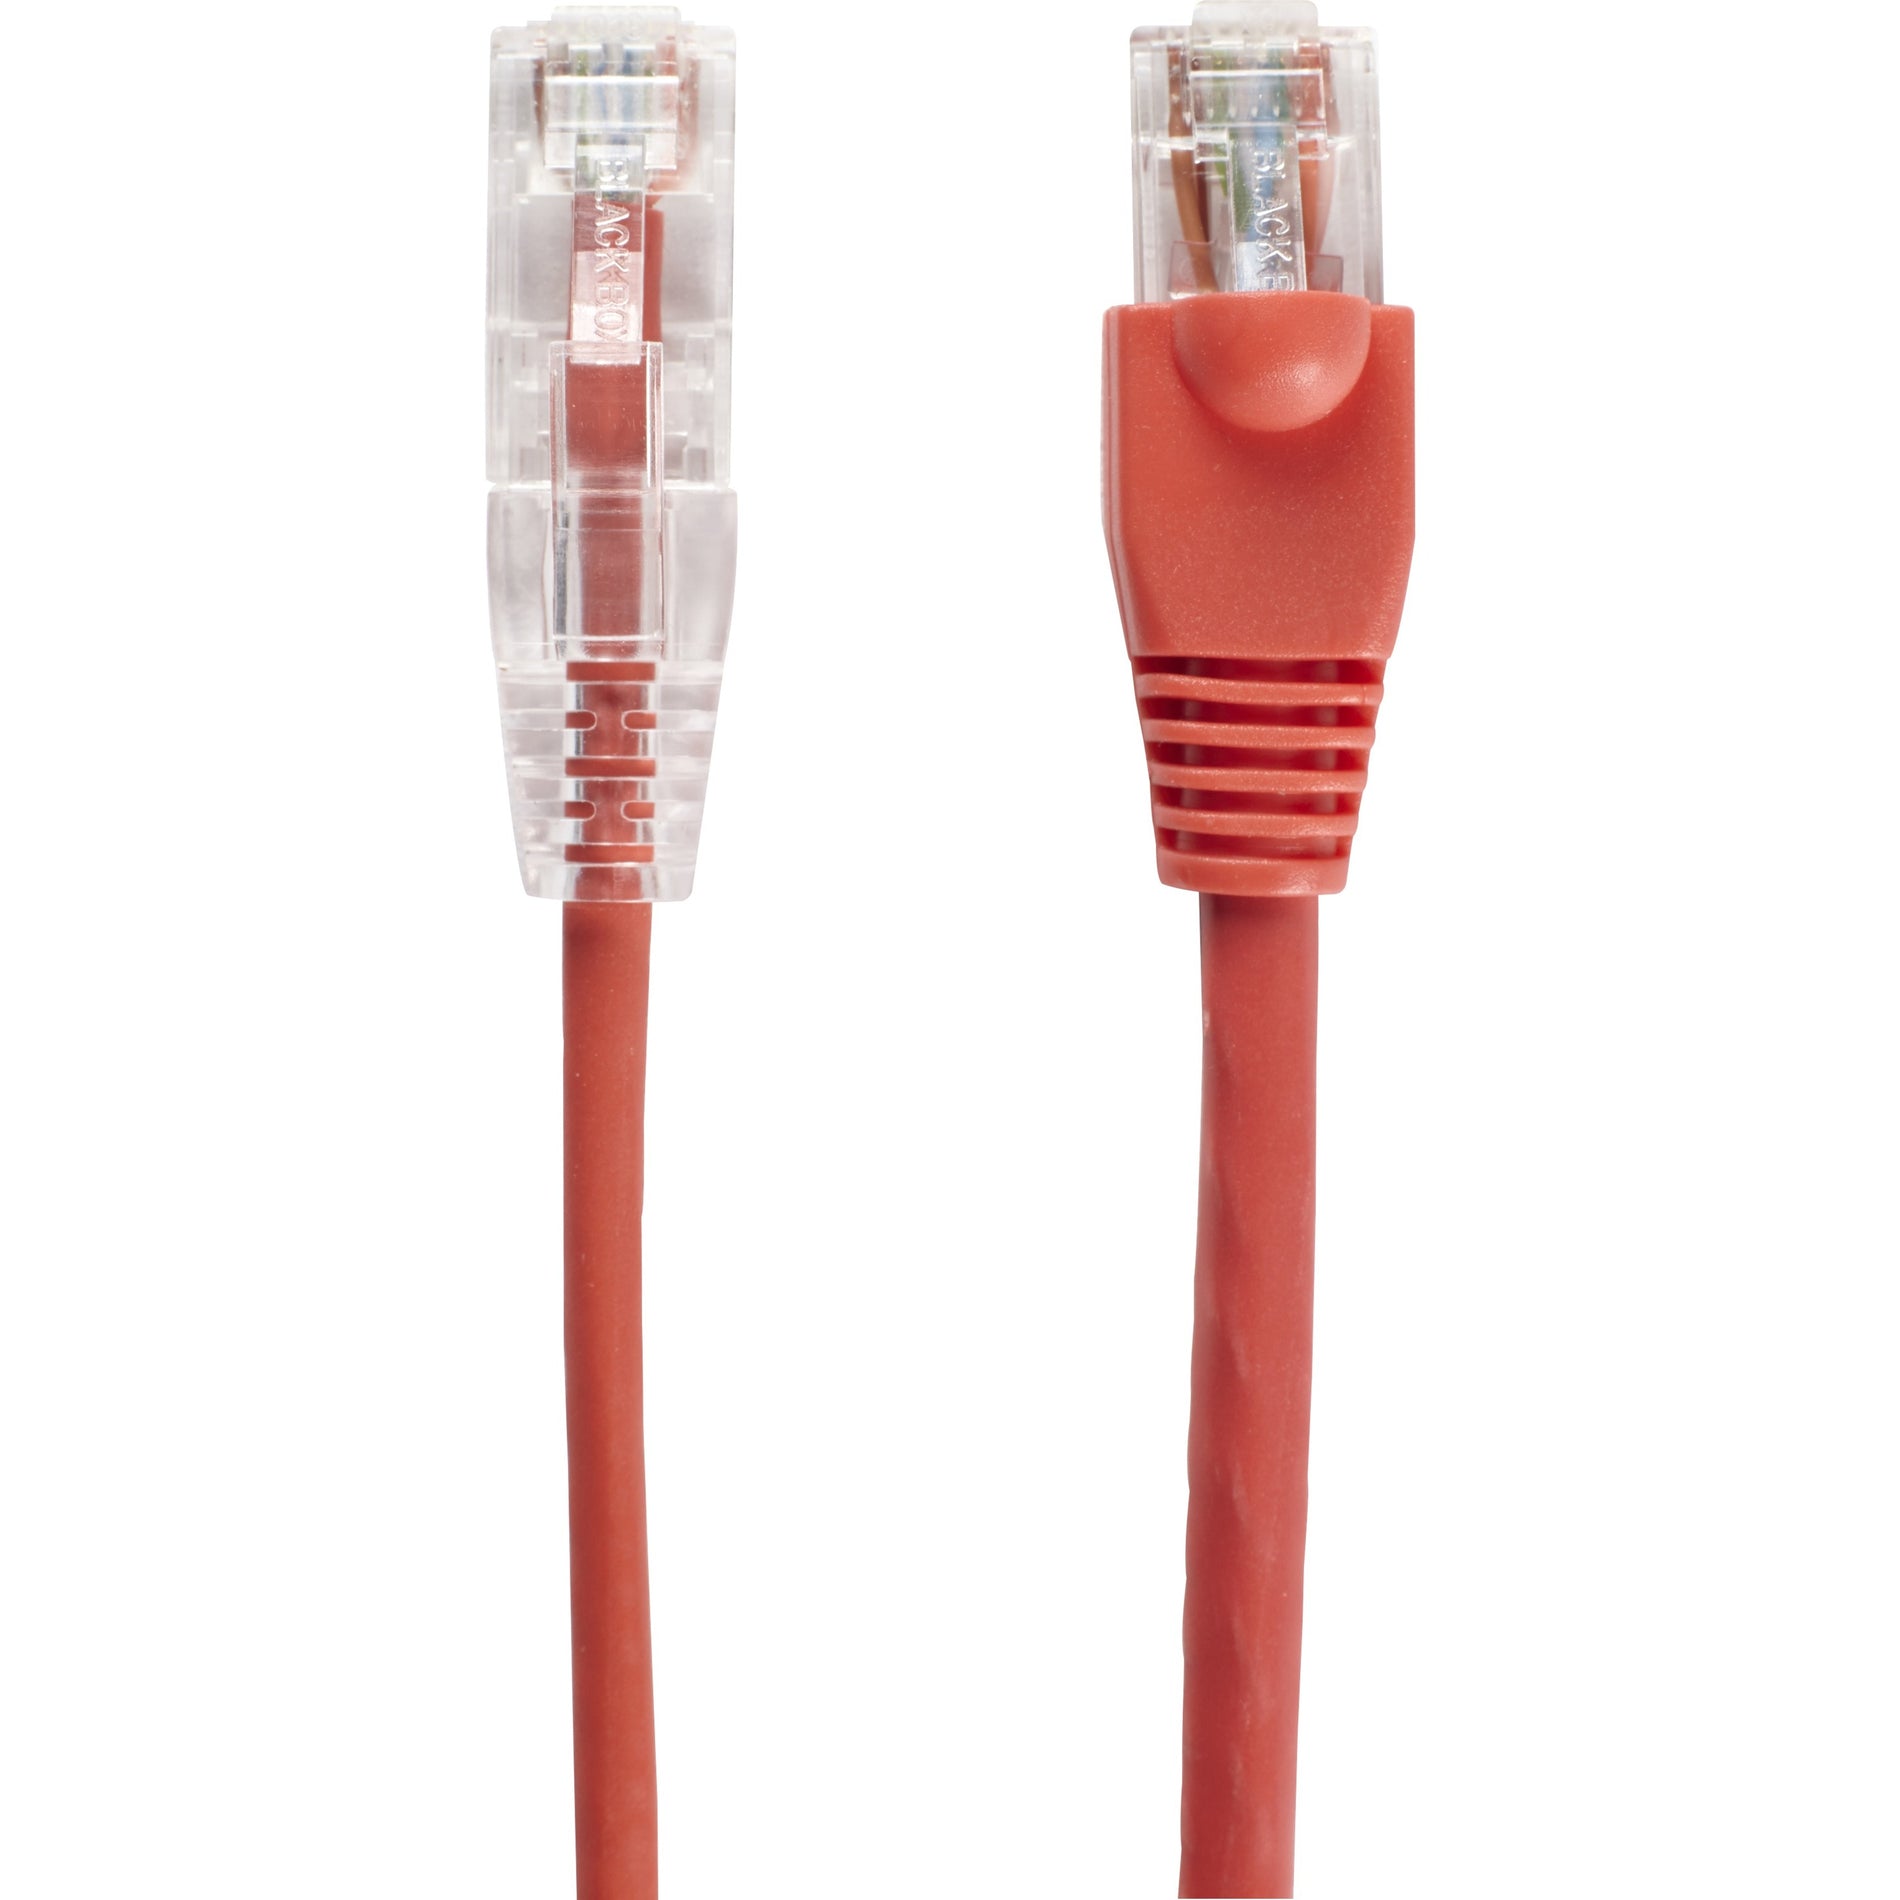 Black Box C6APC28-RD-10 Slim-Net Cat.6a UTP Patch Network Cable, 10 ft, Red